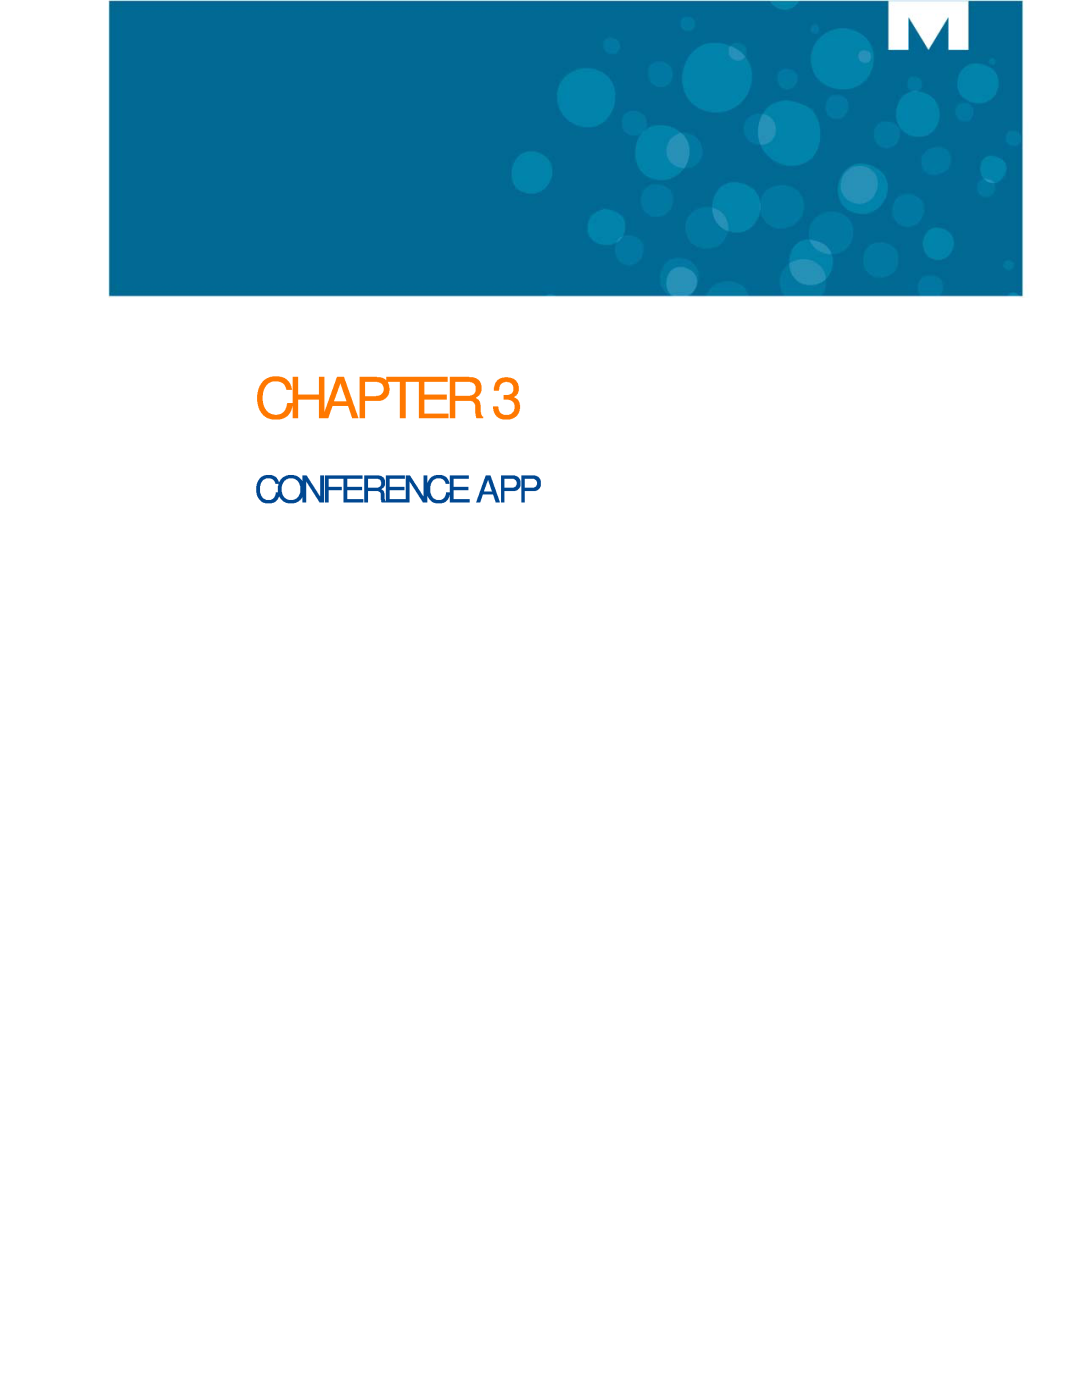 Mitel UC360 manual Conference App, Chapter 